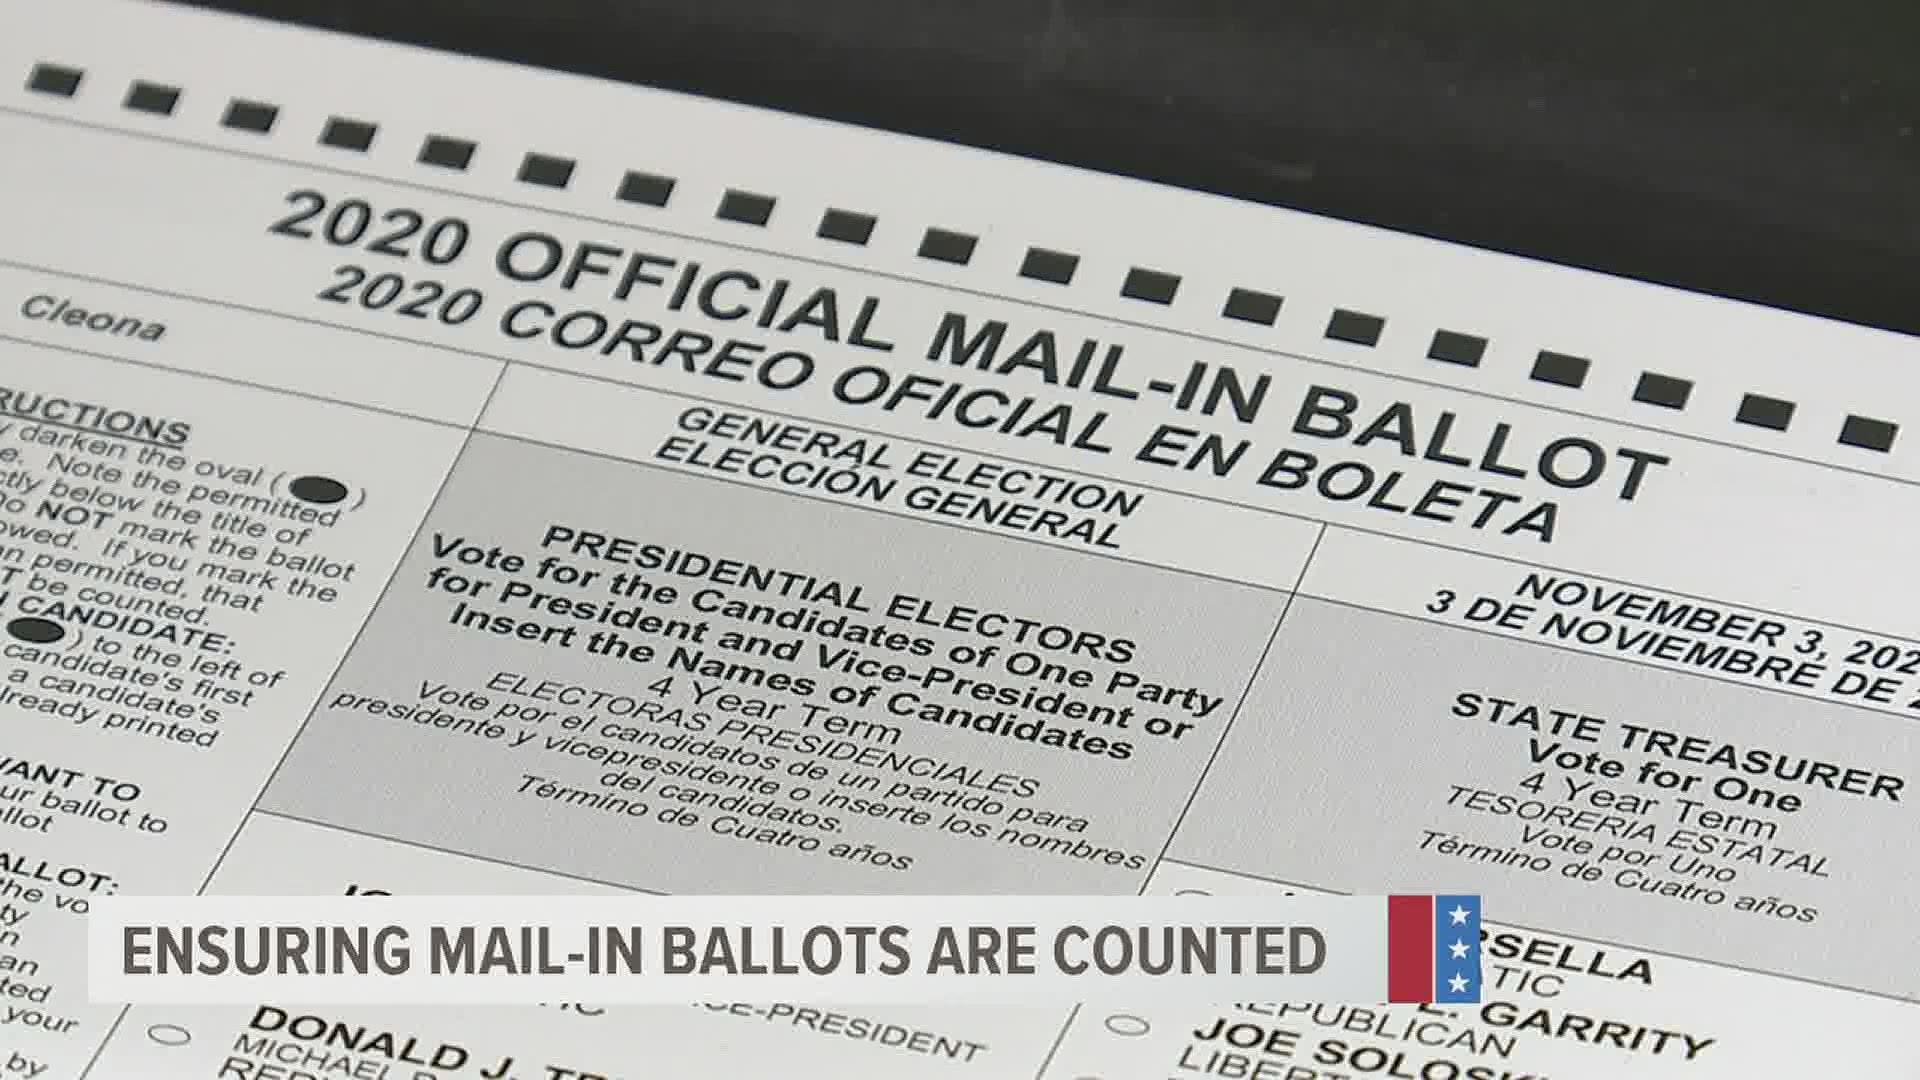 Roughly 20,000 votes by mail-in ballots were canceled and did not count in the state’s primary election. Nearly 3,000 of those votes came from South Central PA.